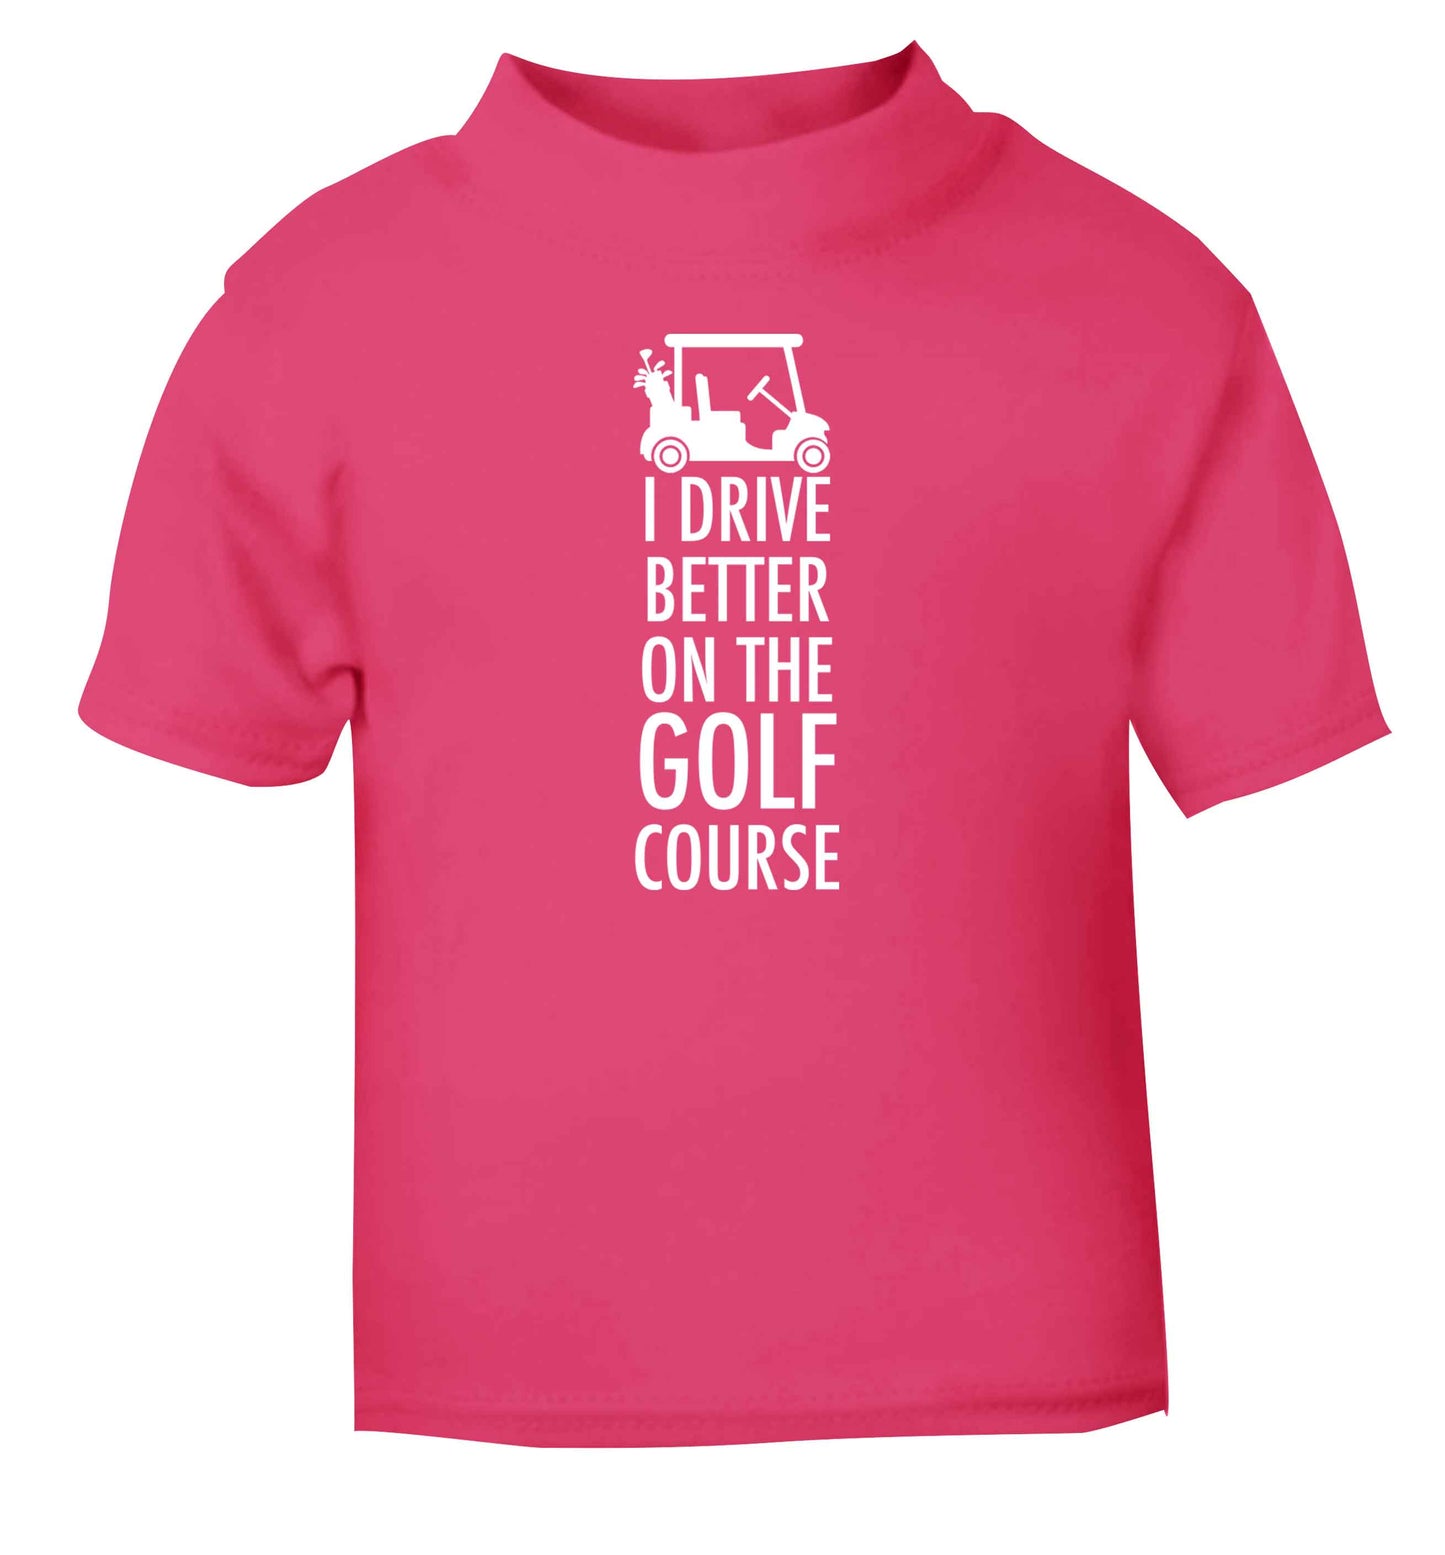 I drive better on the golf course pink Baby Toddler Tshirt 2 Years